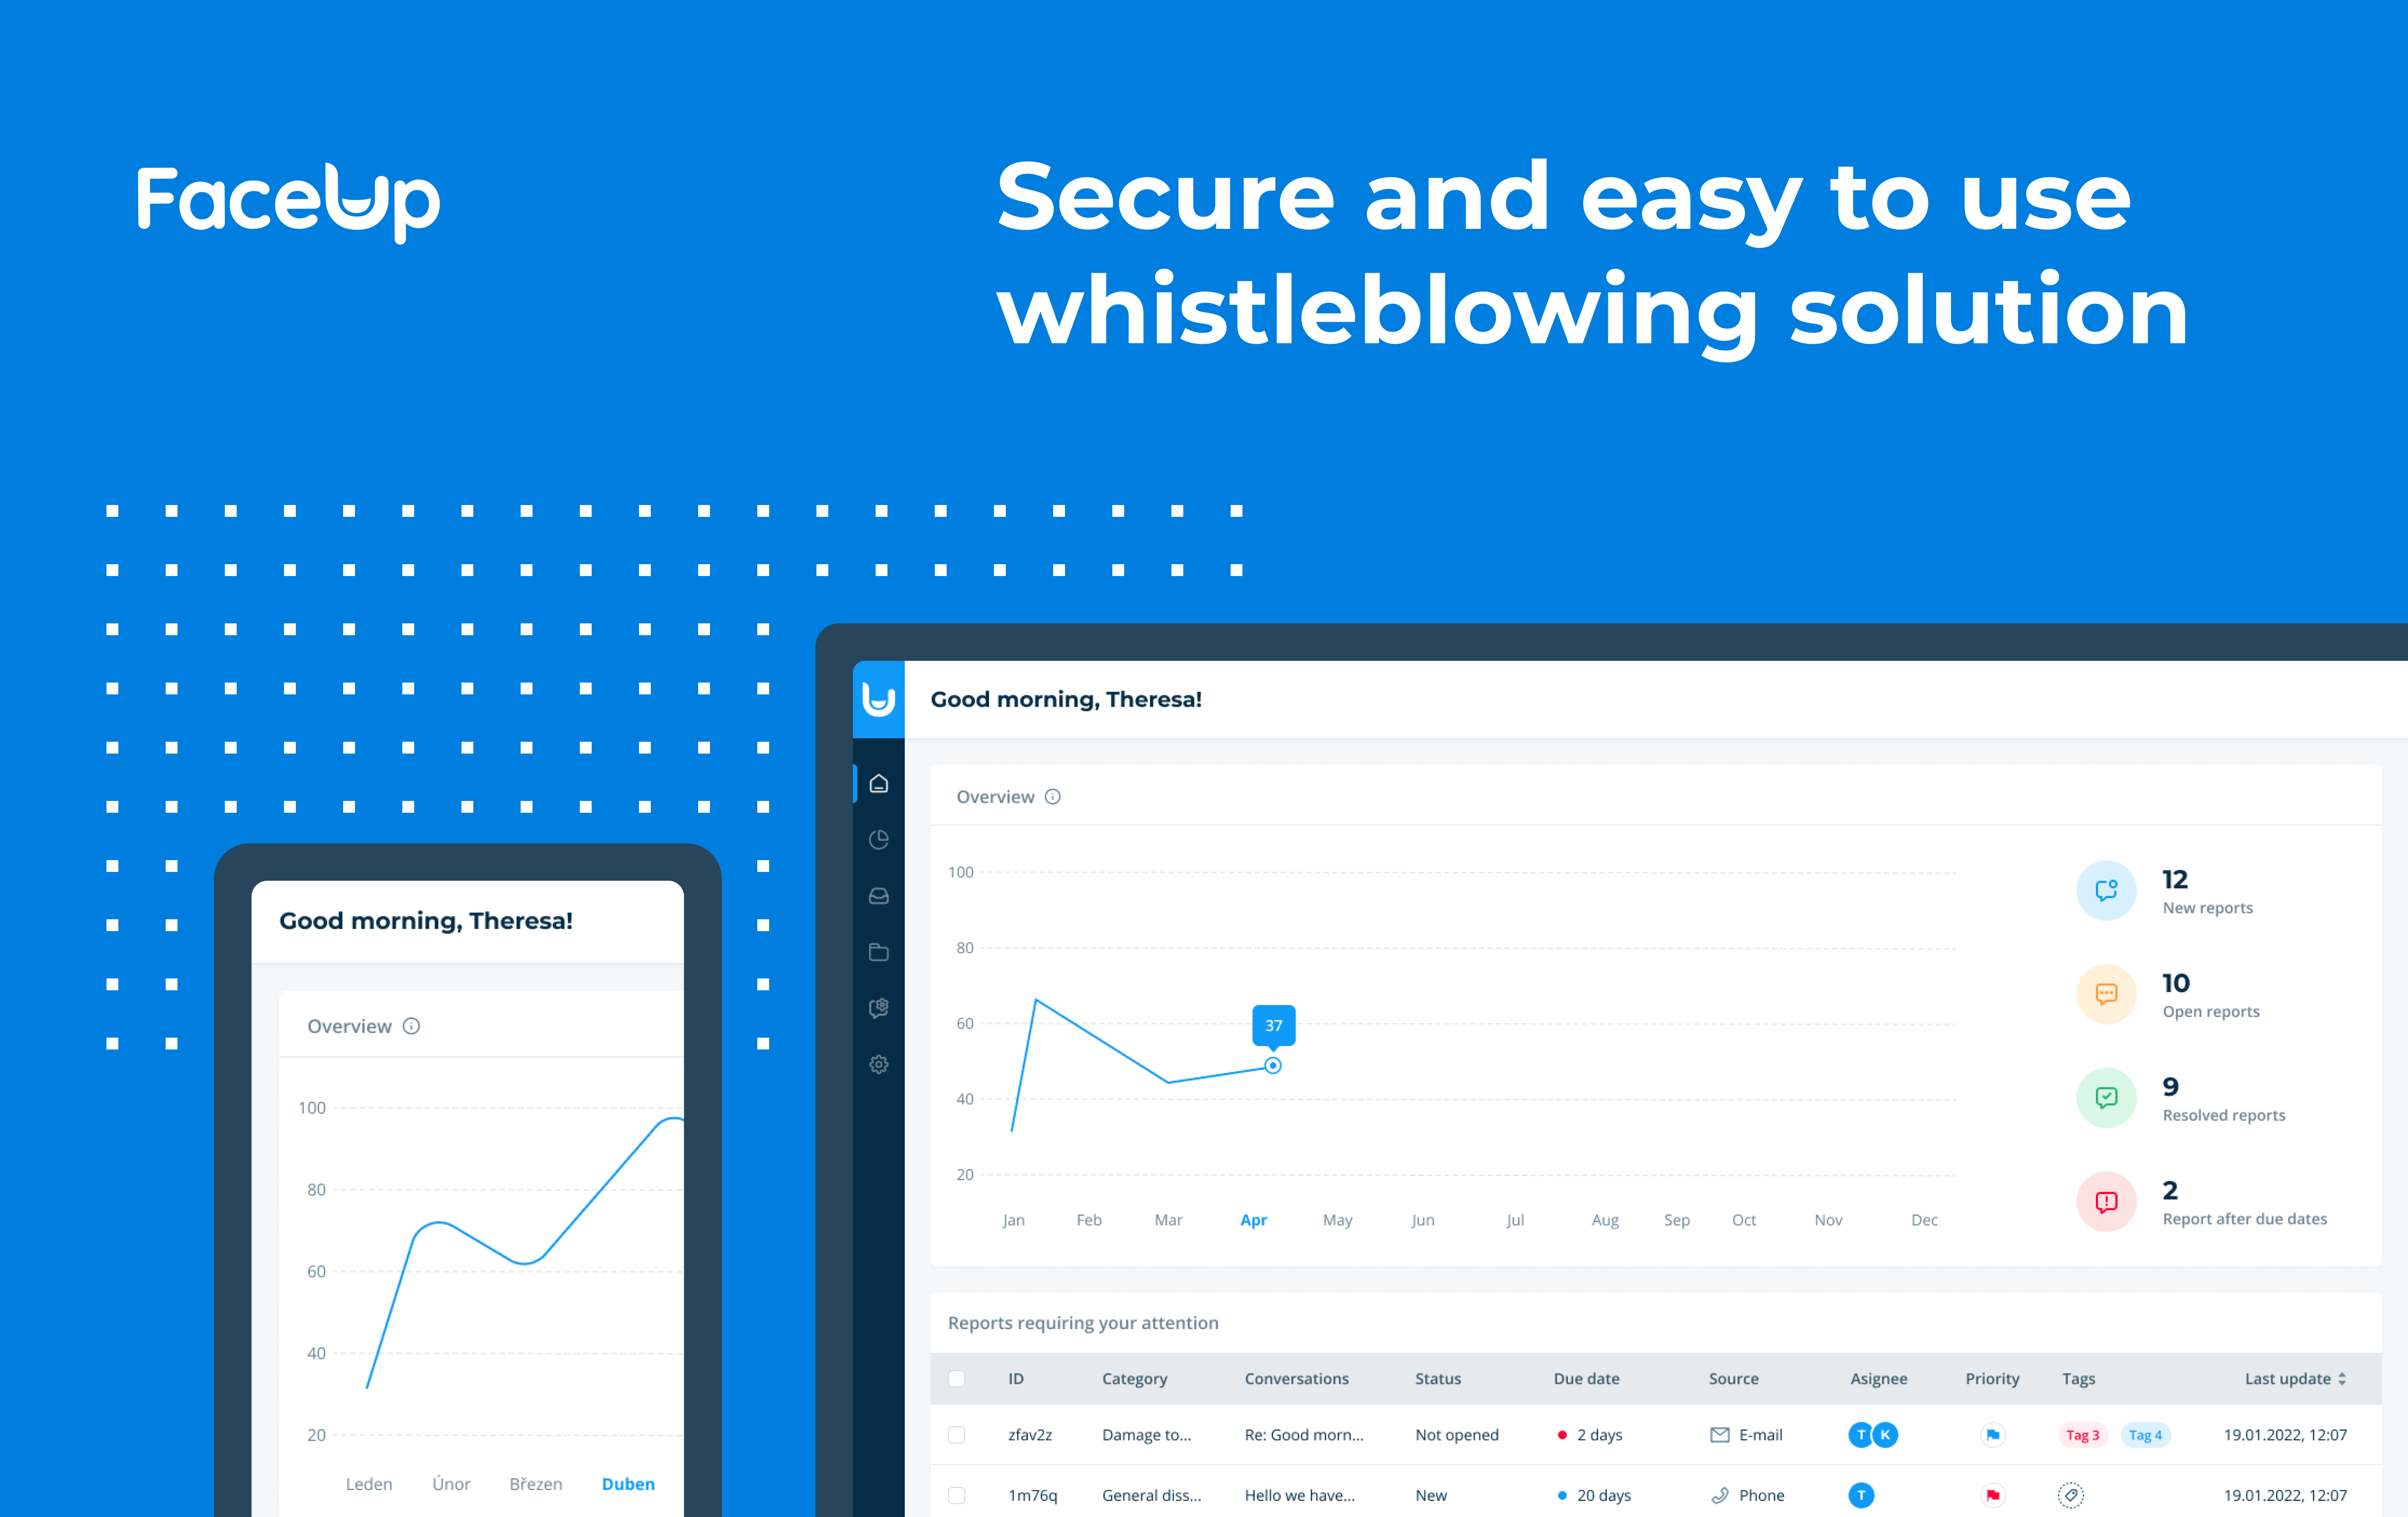 FaceUp Software - FaceUp is a secure, intuitive and easy to use solution, which allows employees and pupils to report instances of wrongdoing. Anybody can anonymously send reports through a website or mobile app in just two clicks.